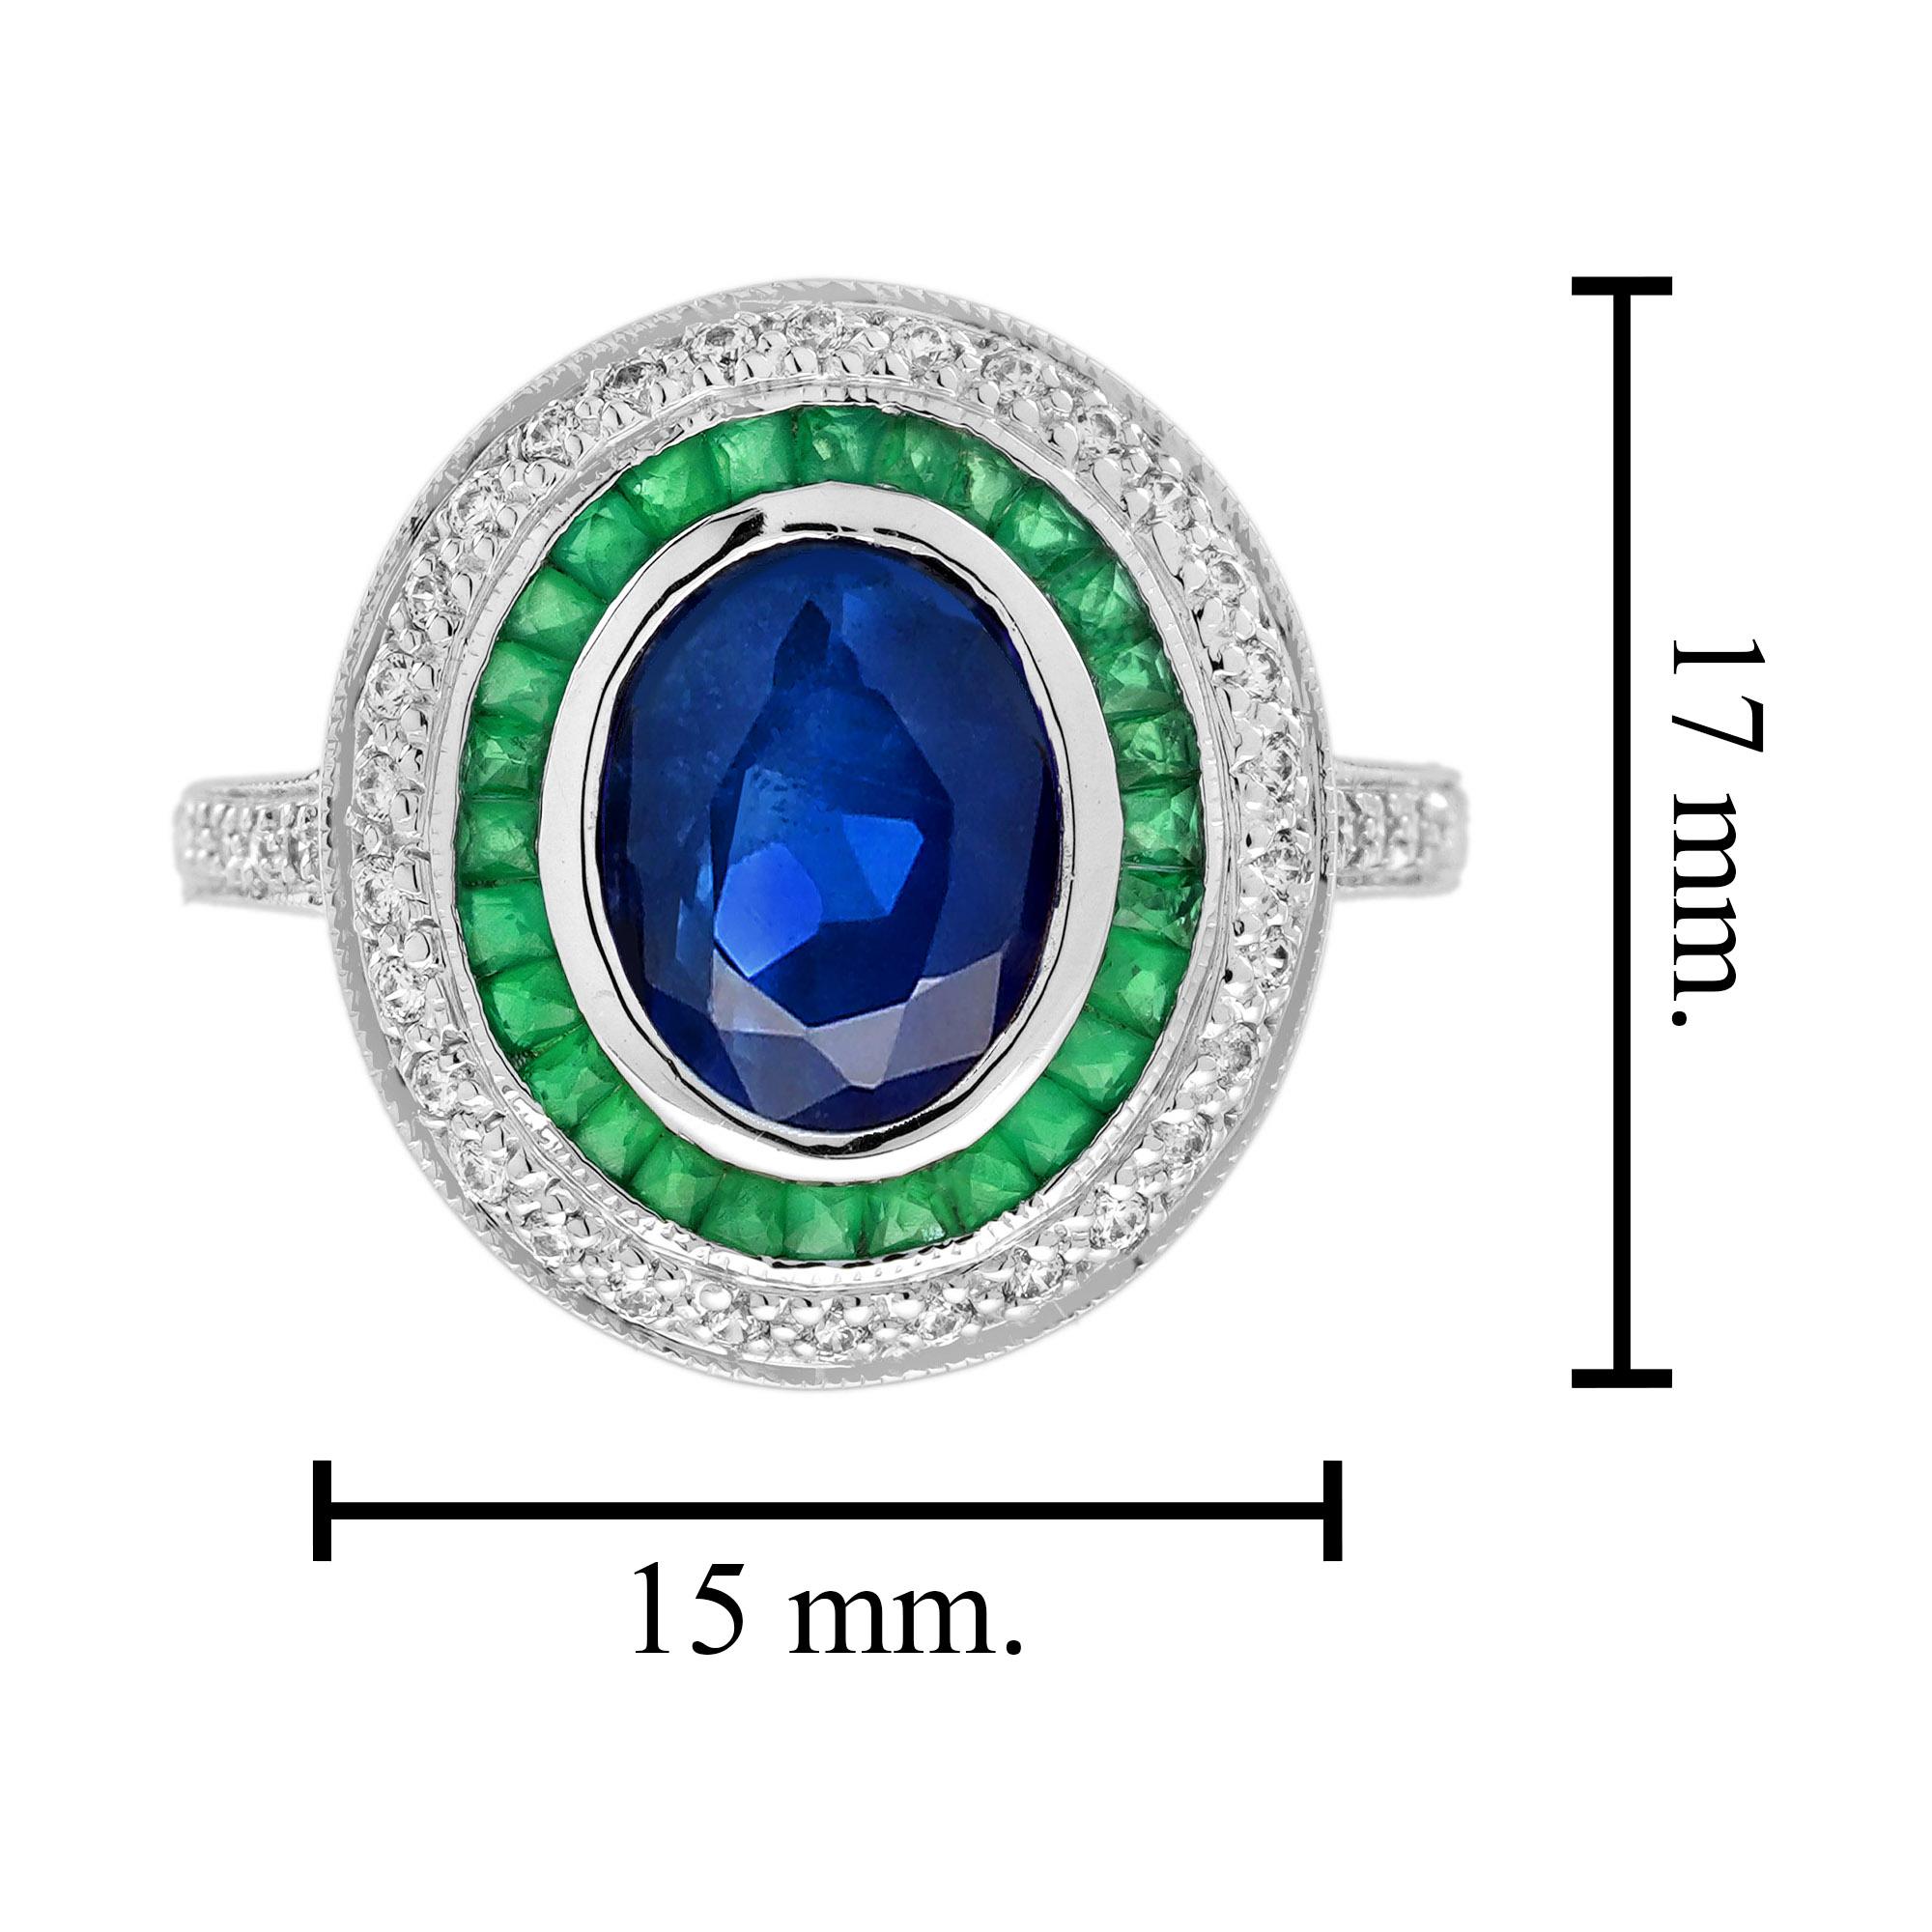 Blue Sapphire Emerald Diamond Art Deco Style Engagement Ring in 18K White Gold For Sale 2